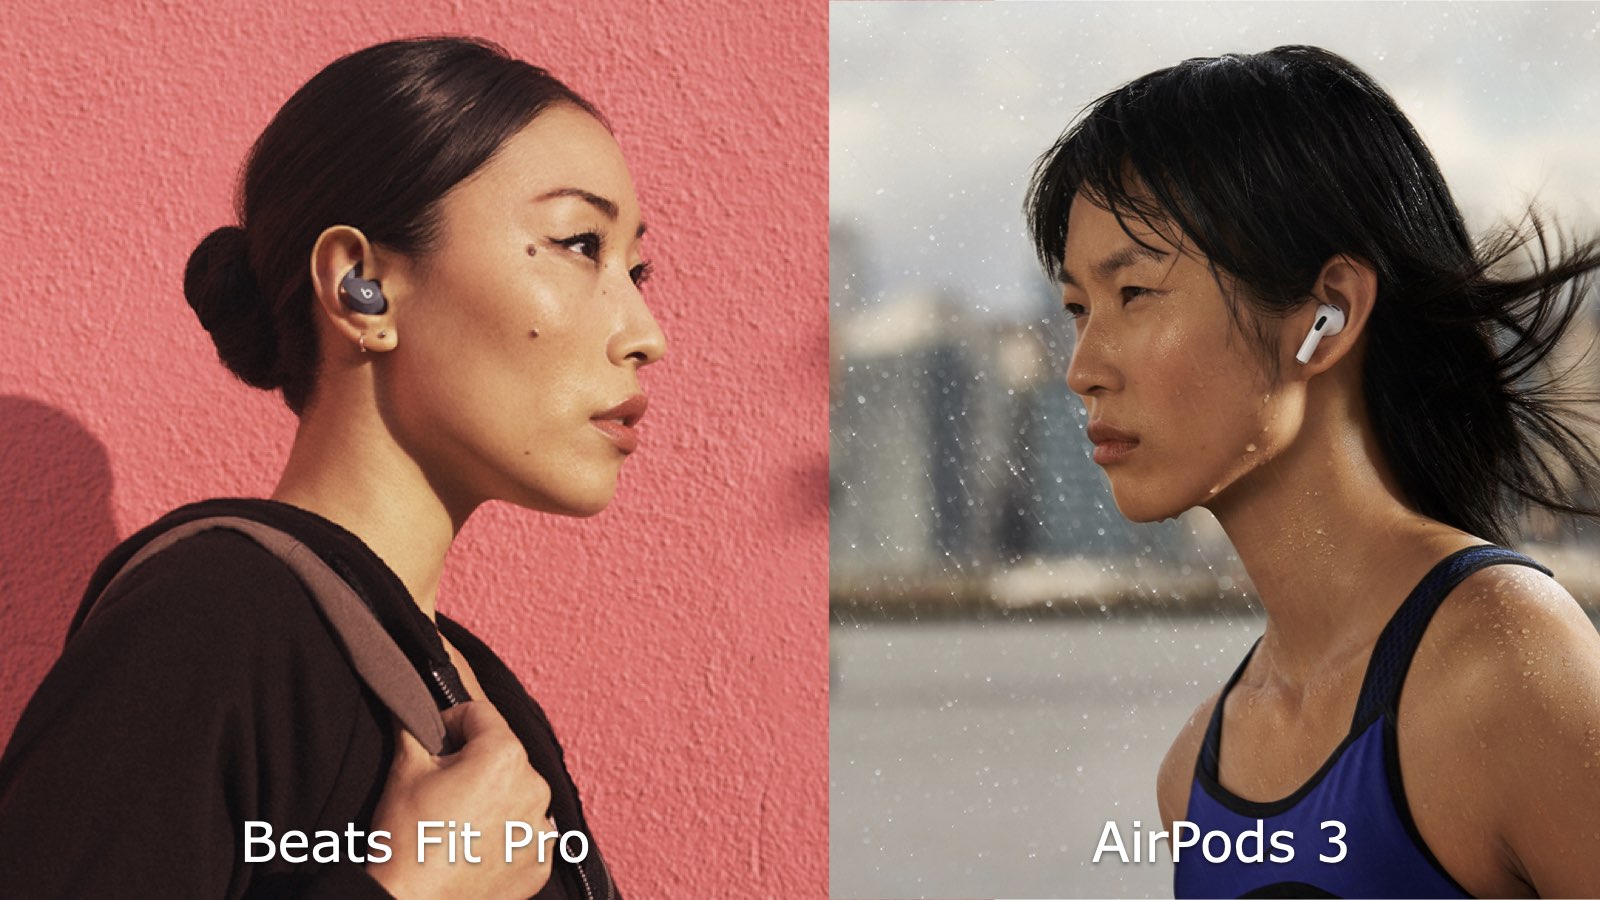 Beats Fit Pro VS AirPods 3